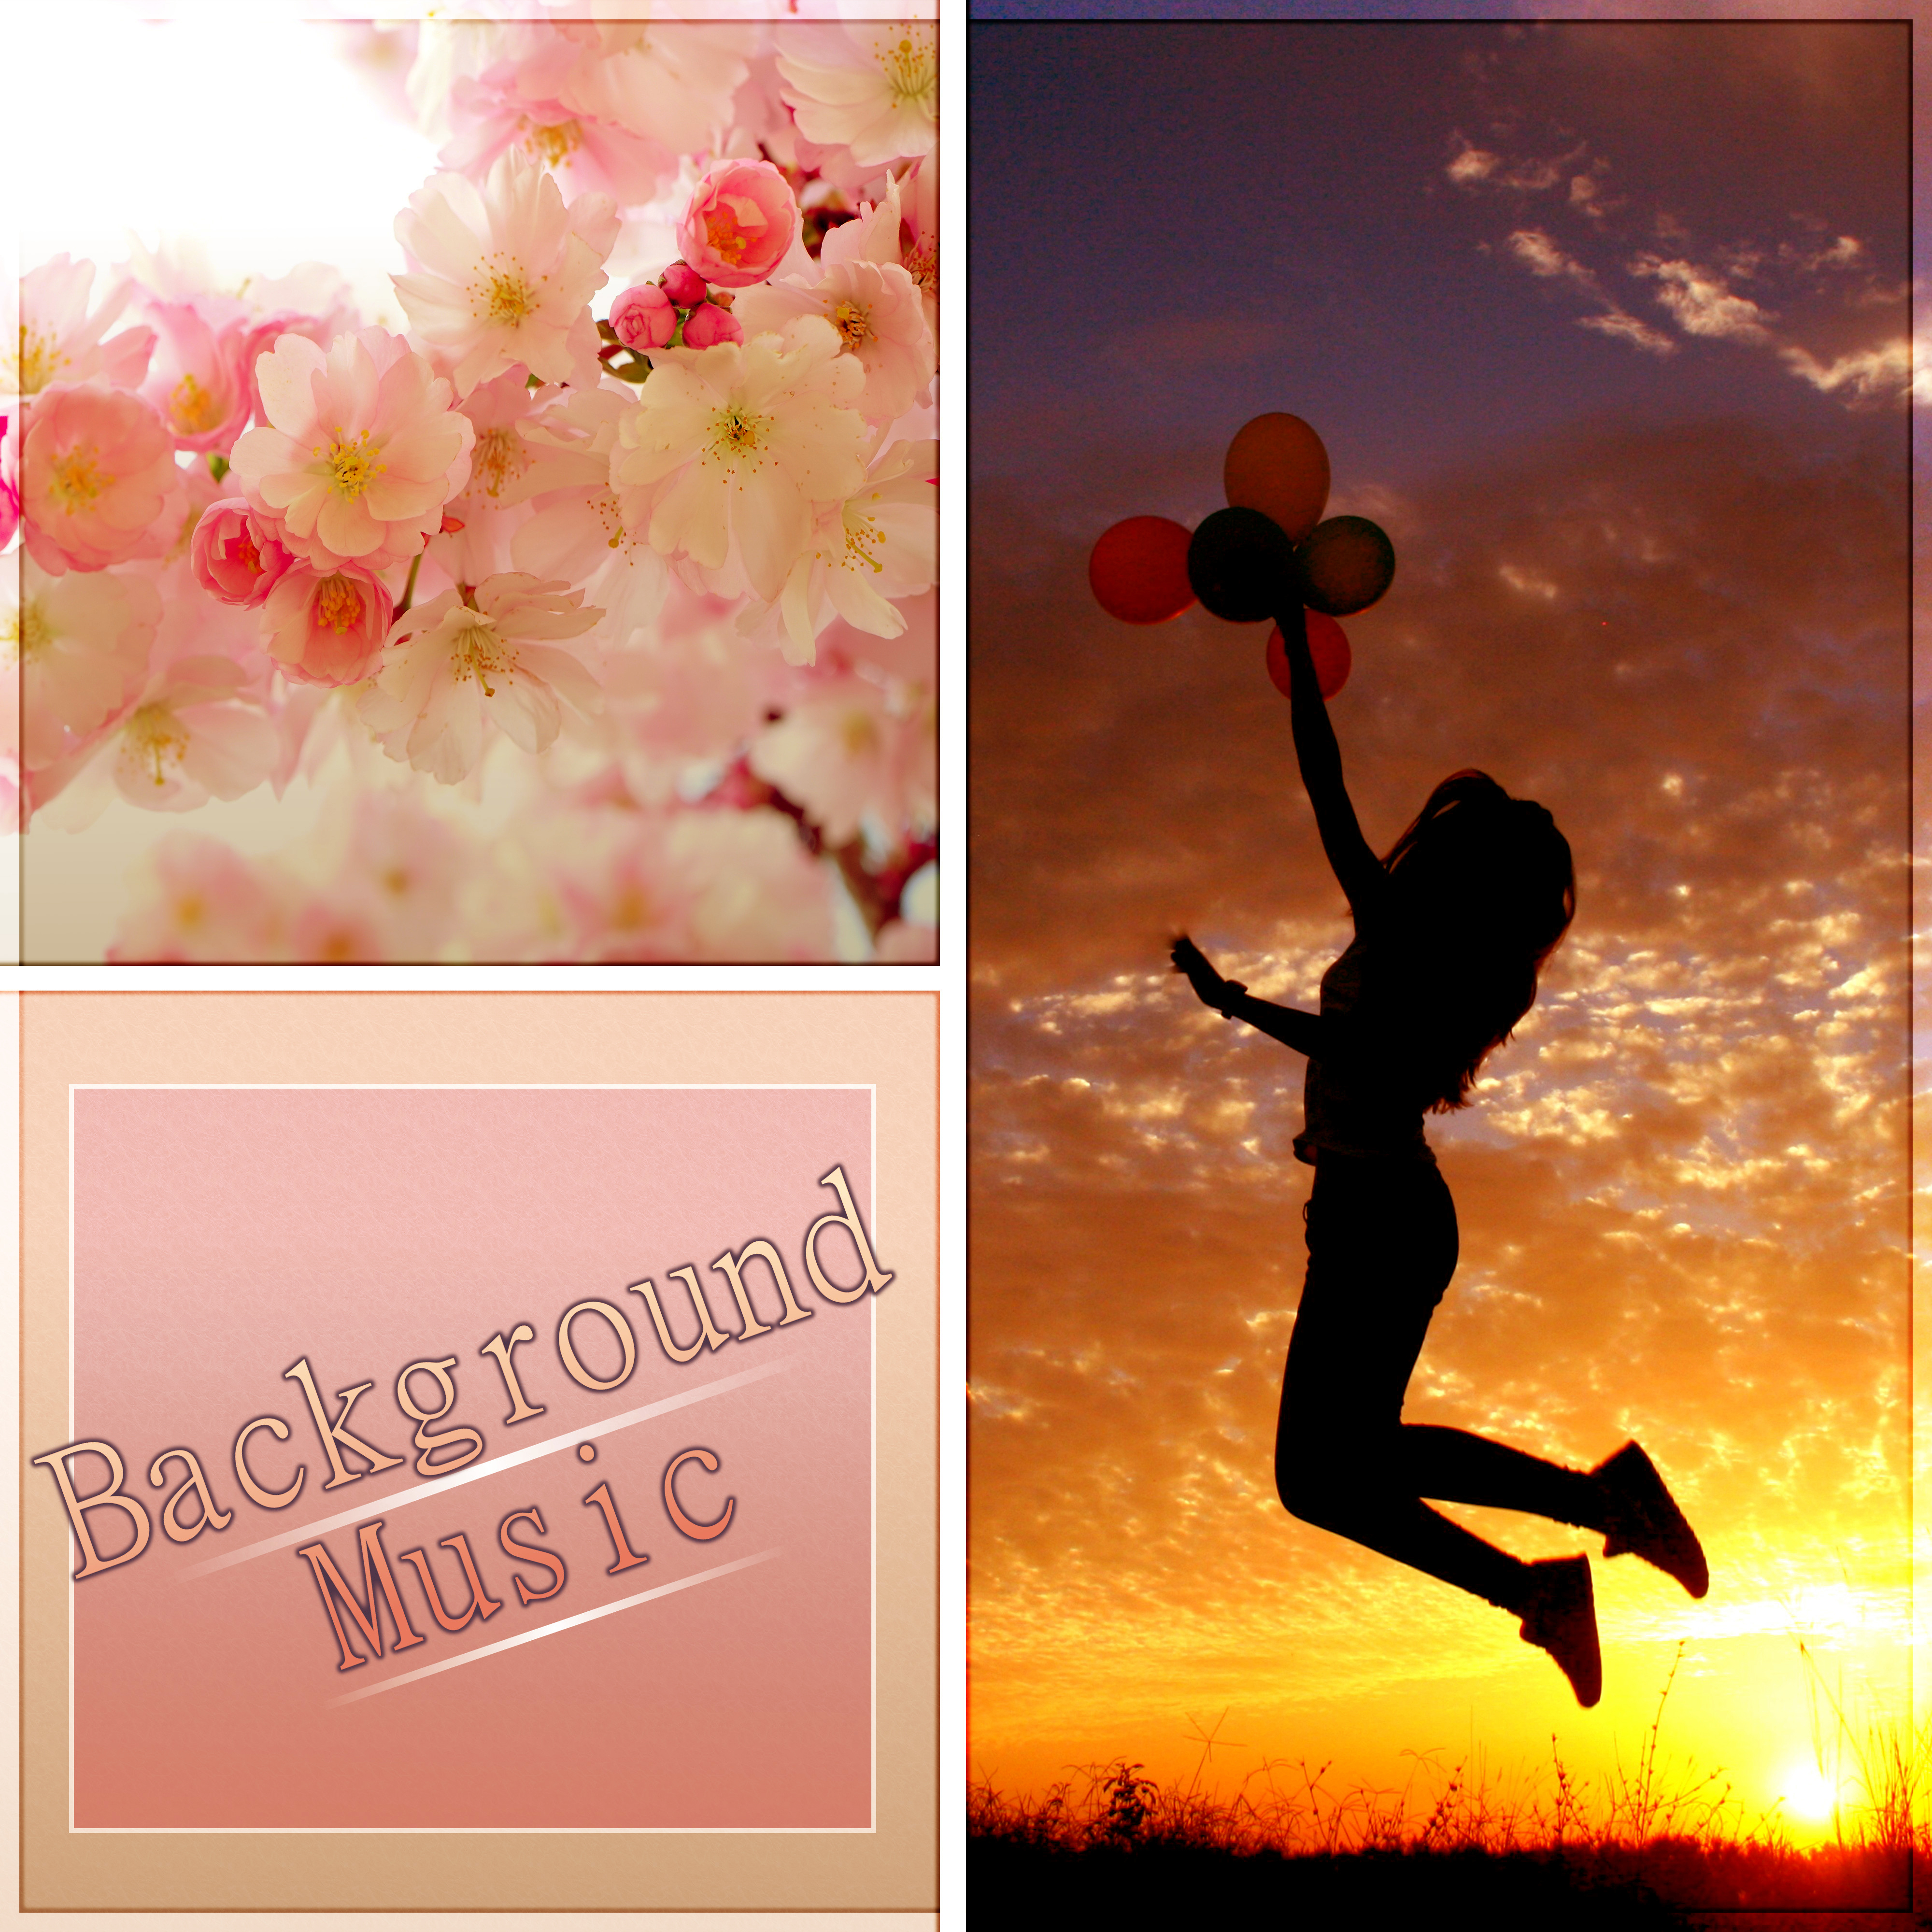 Background Music - Music to Help You Sleep & Relax, Sleeping Through the Night, Sweet Dreams, Inner Peace, Soothing Sounds & Soft Piano Music for Lounge